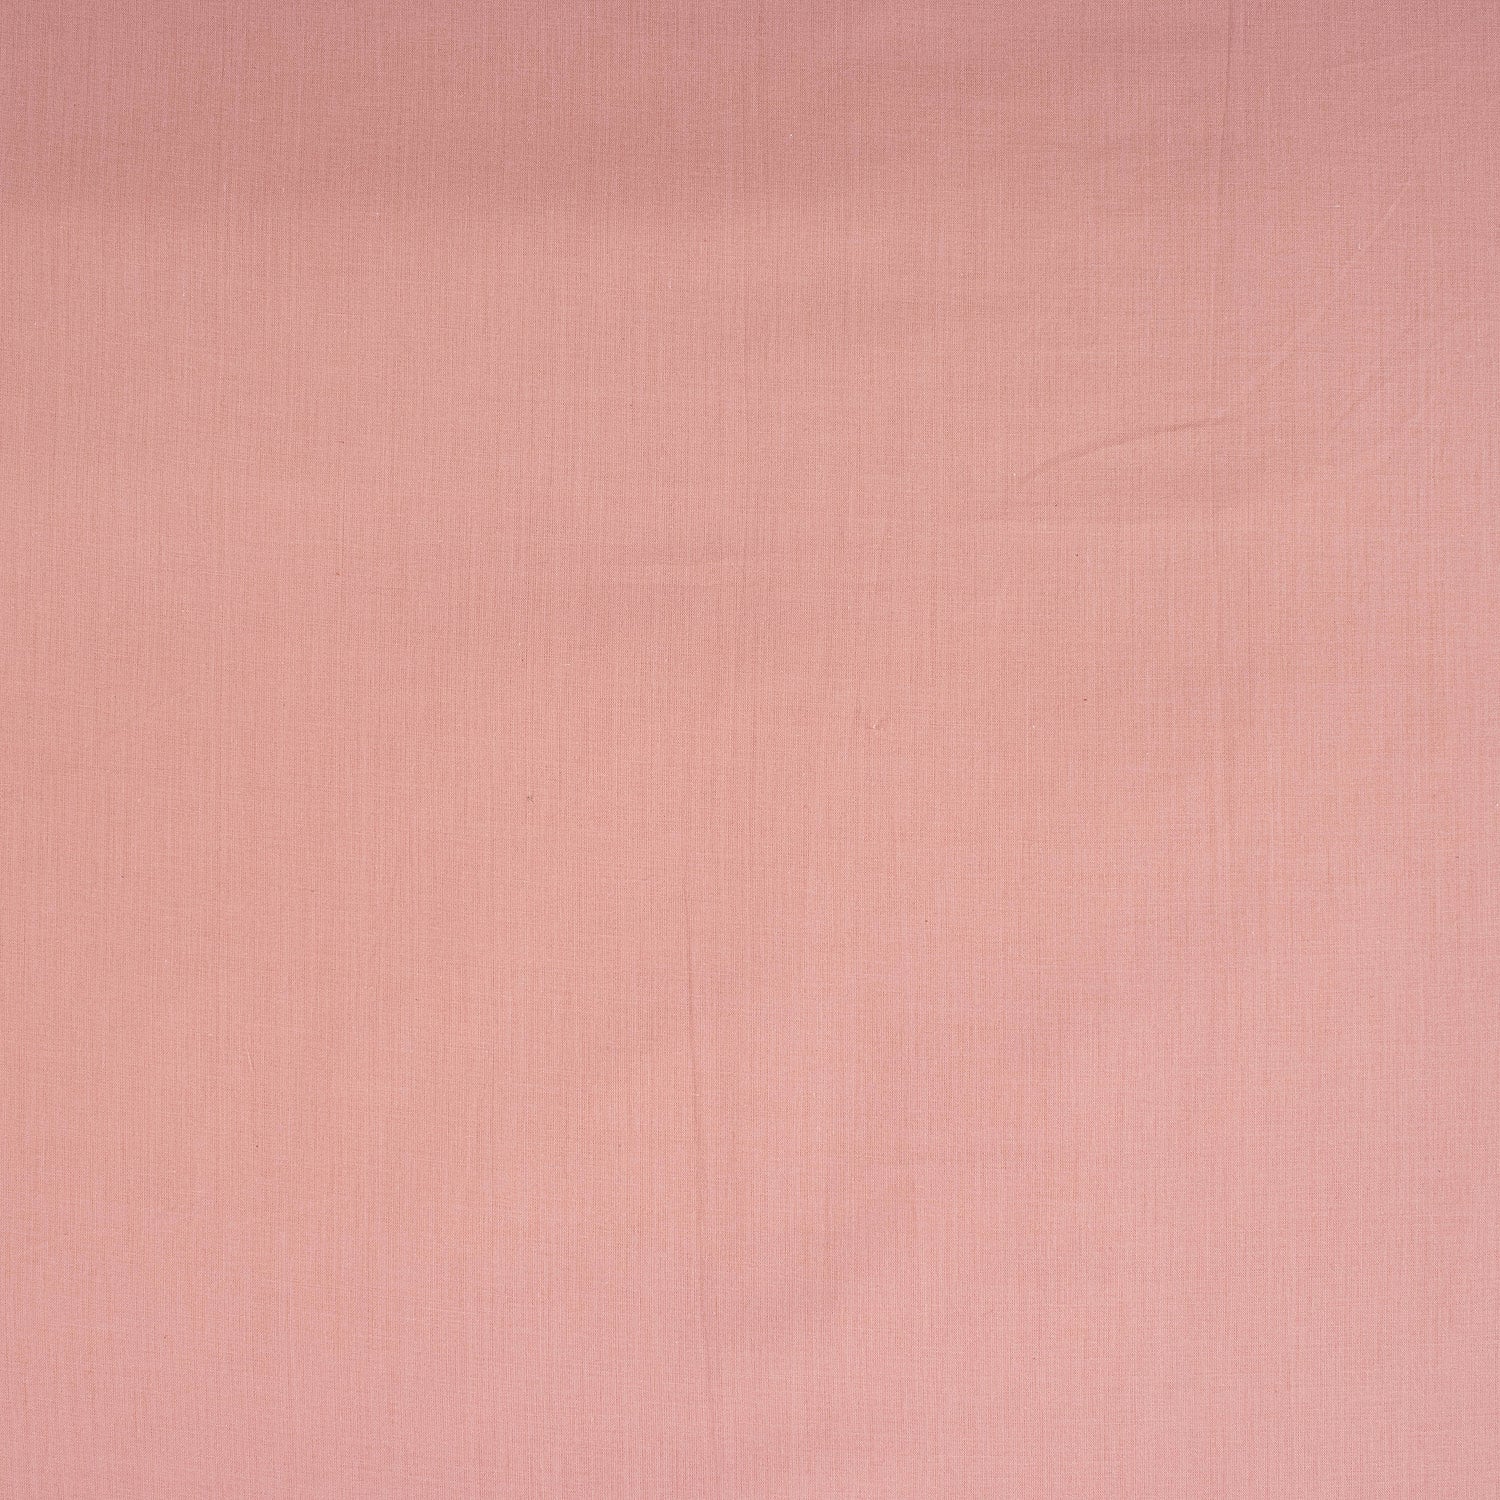 Solid Light Pink Soft Cotton Plain Material